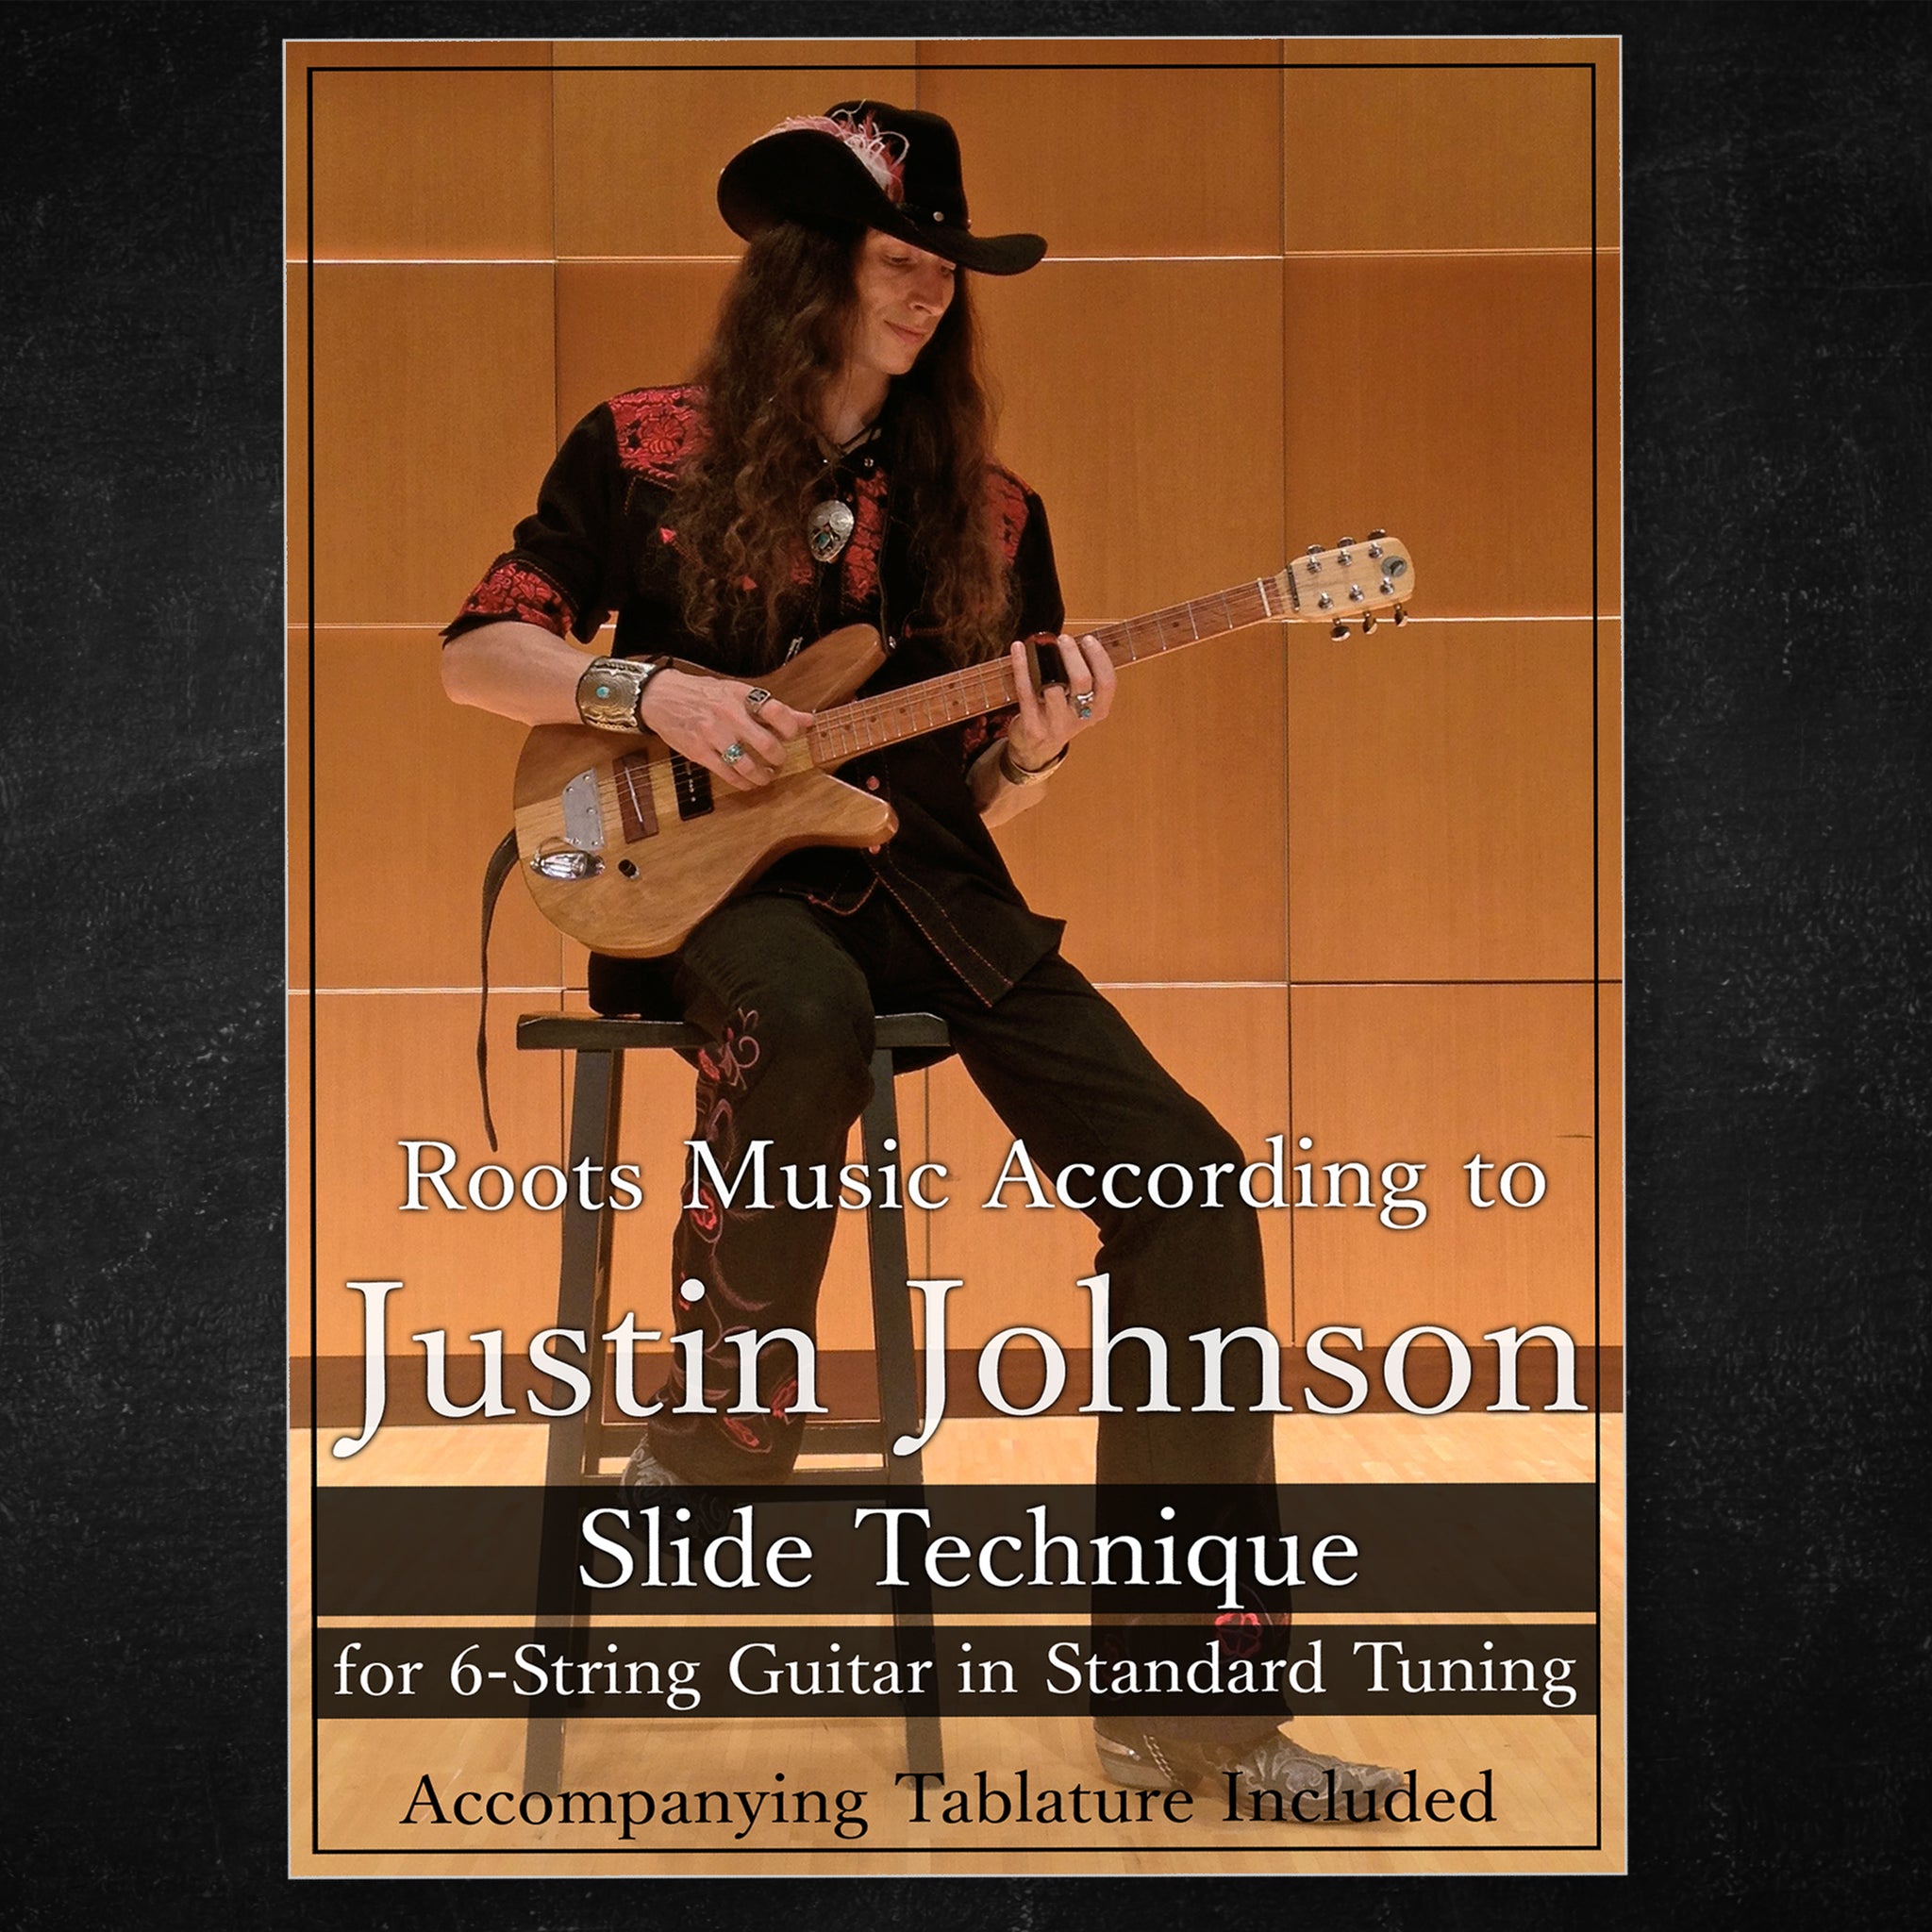 "Slide Technique for 6-String Guitar in Standard Tuning" Guitar Lesson Video Course - DIGITAL DOWNLOAD